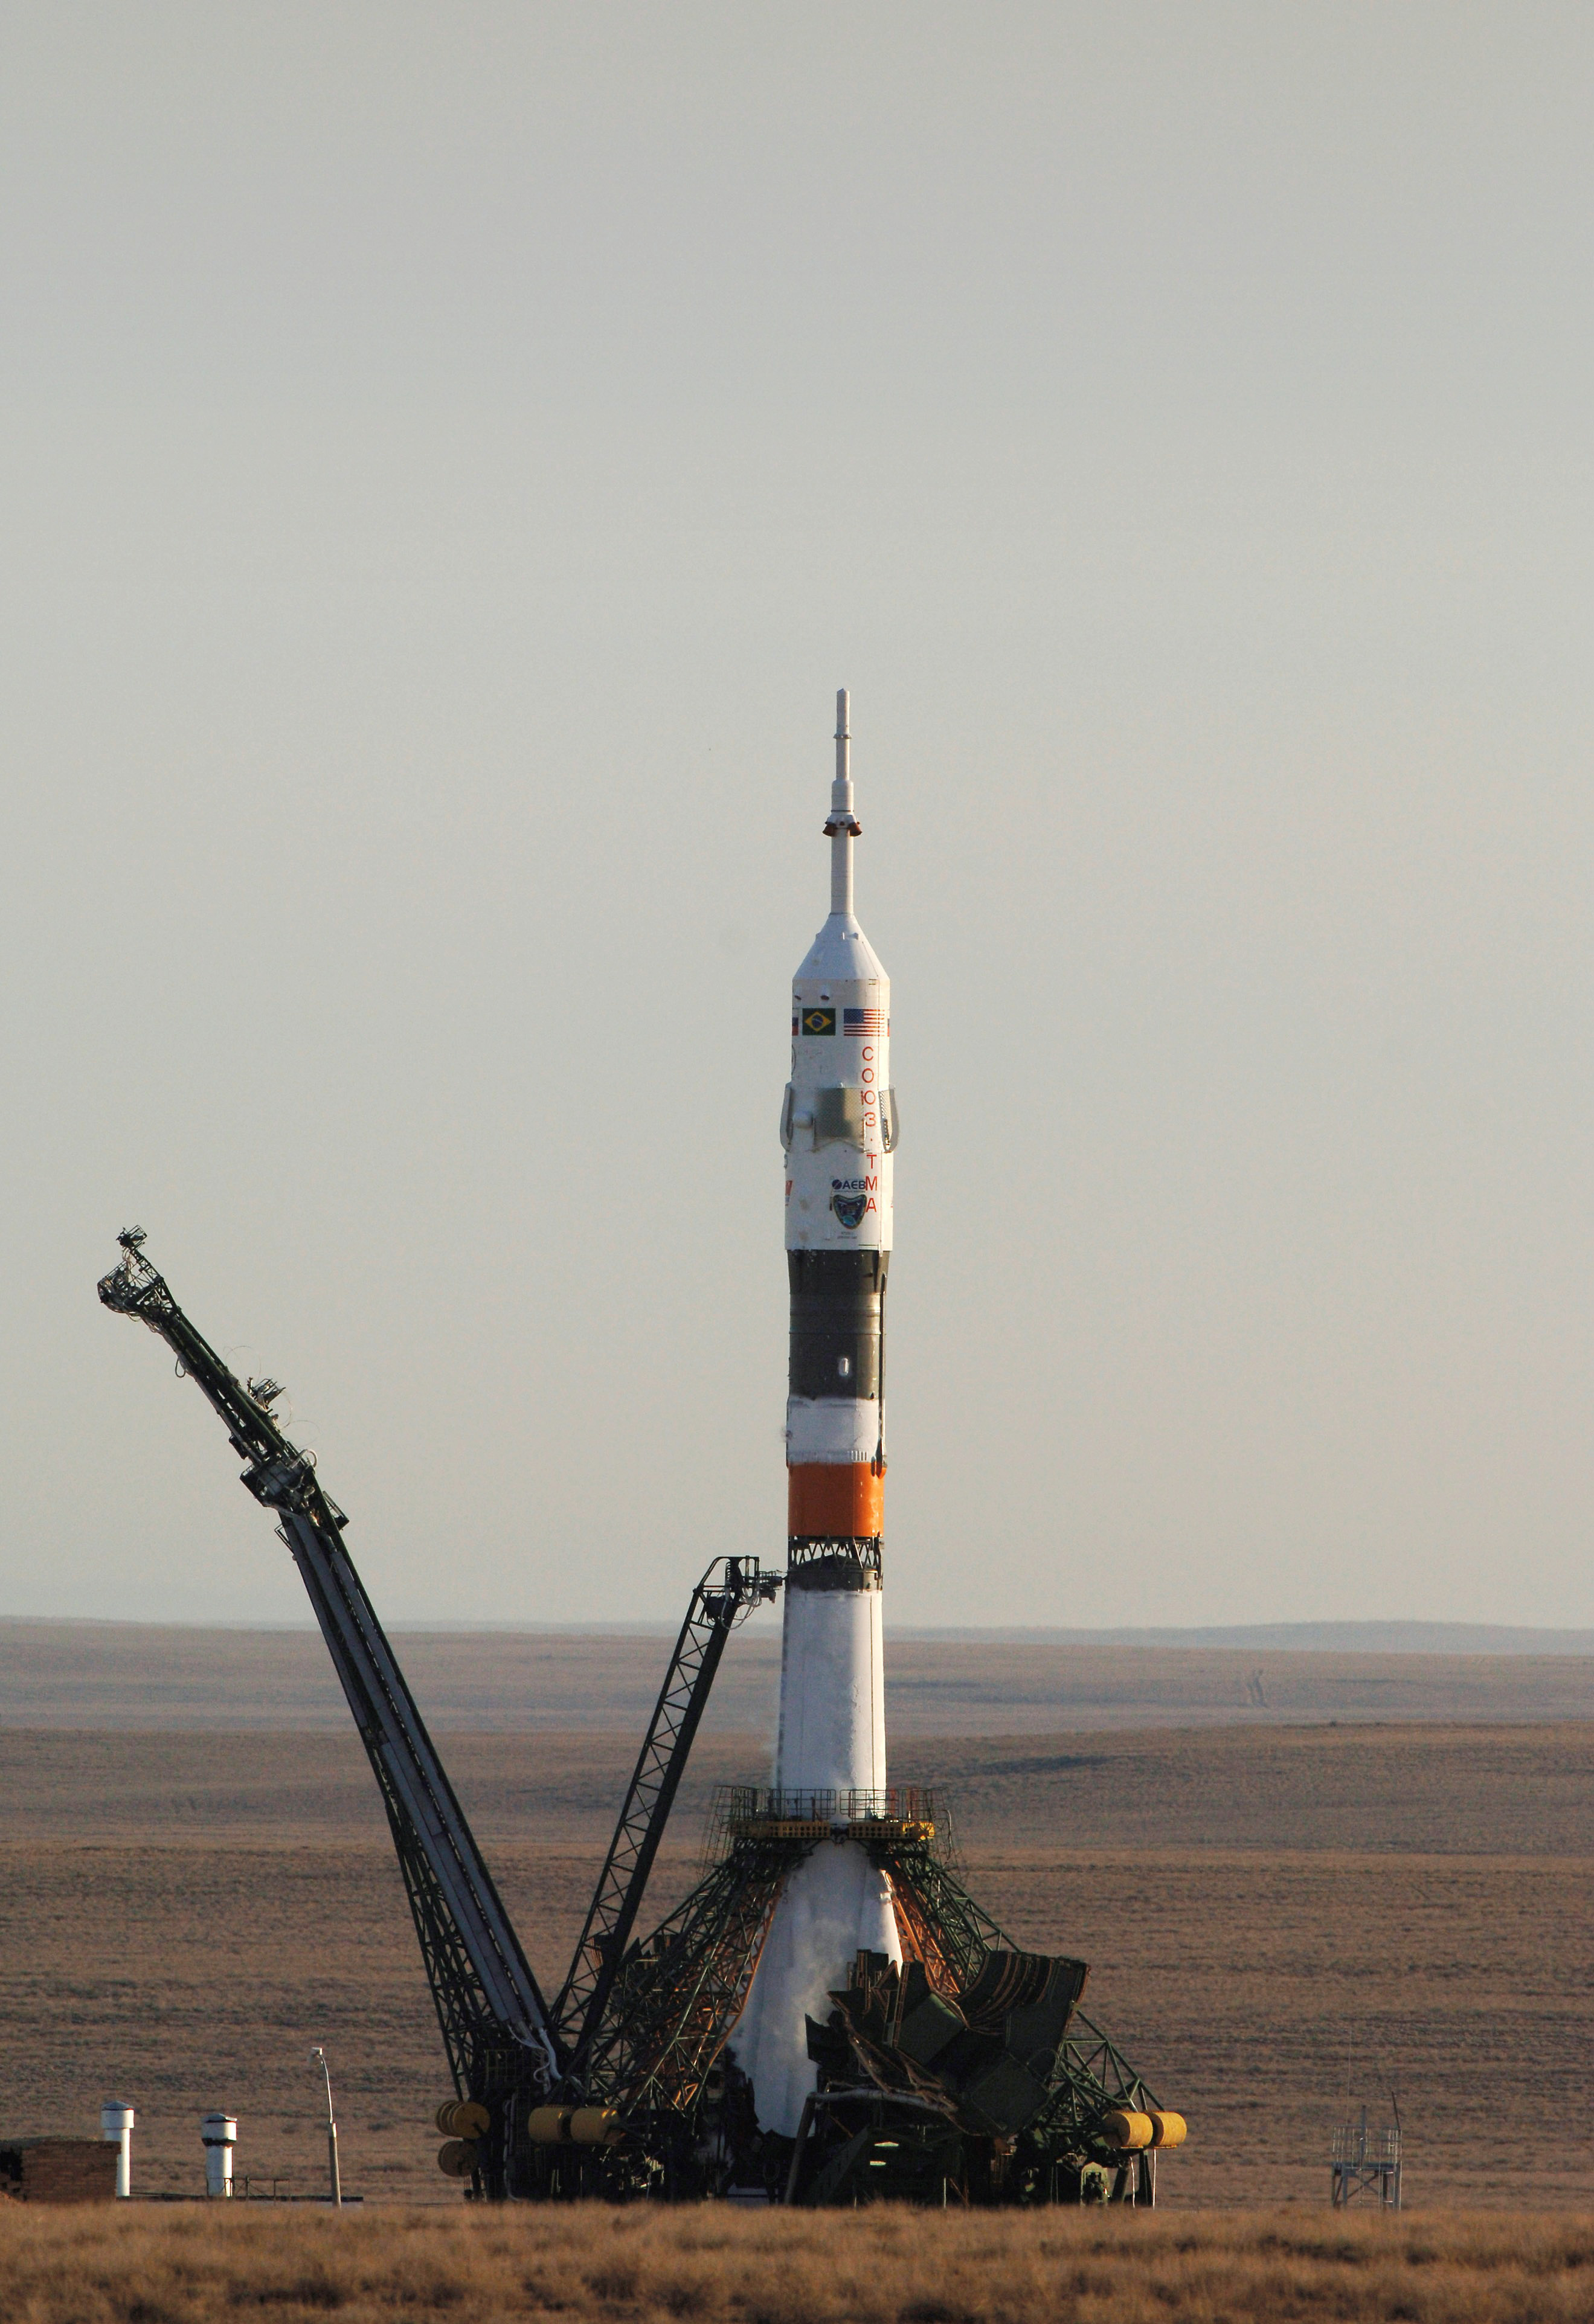 Stock Photograph of the Soyuz Rocket at the Baikonur Cosmodrome.